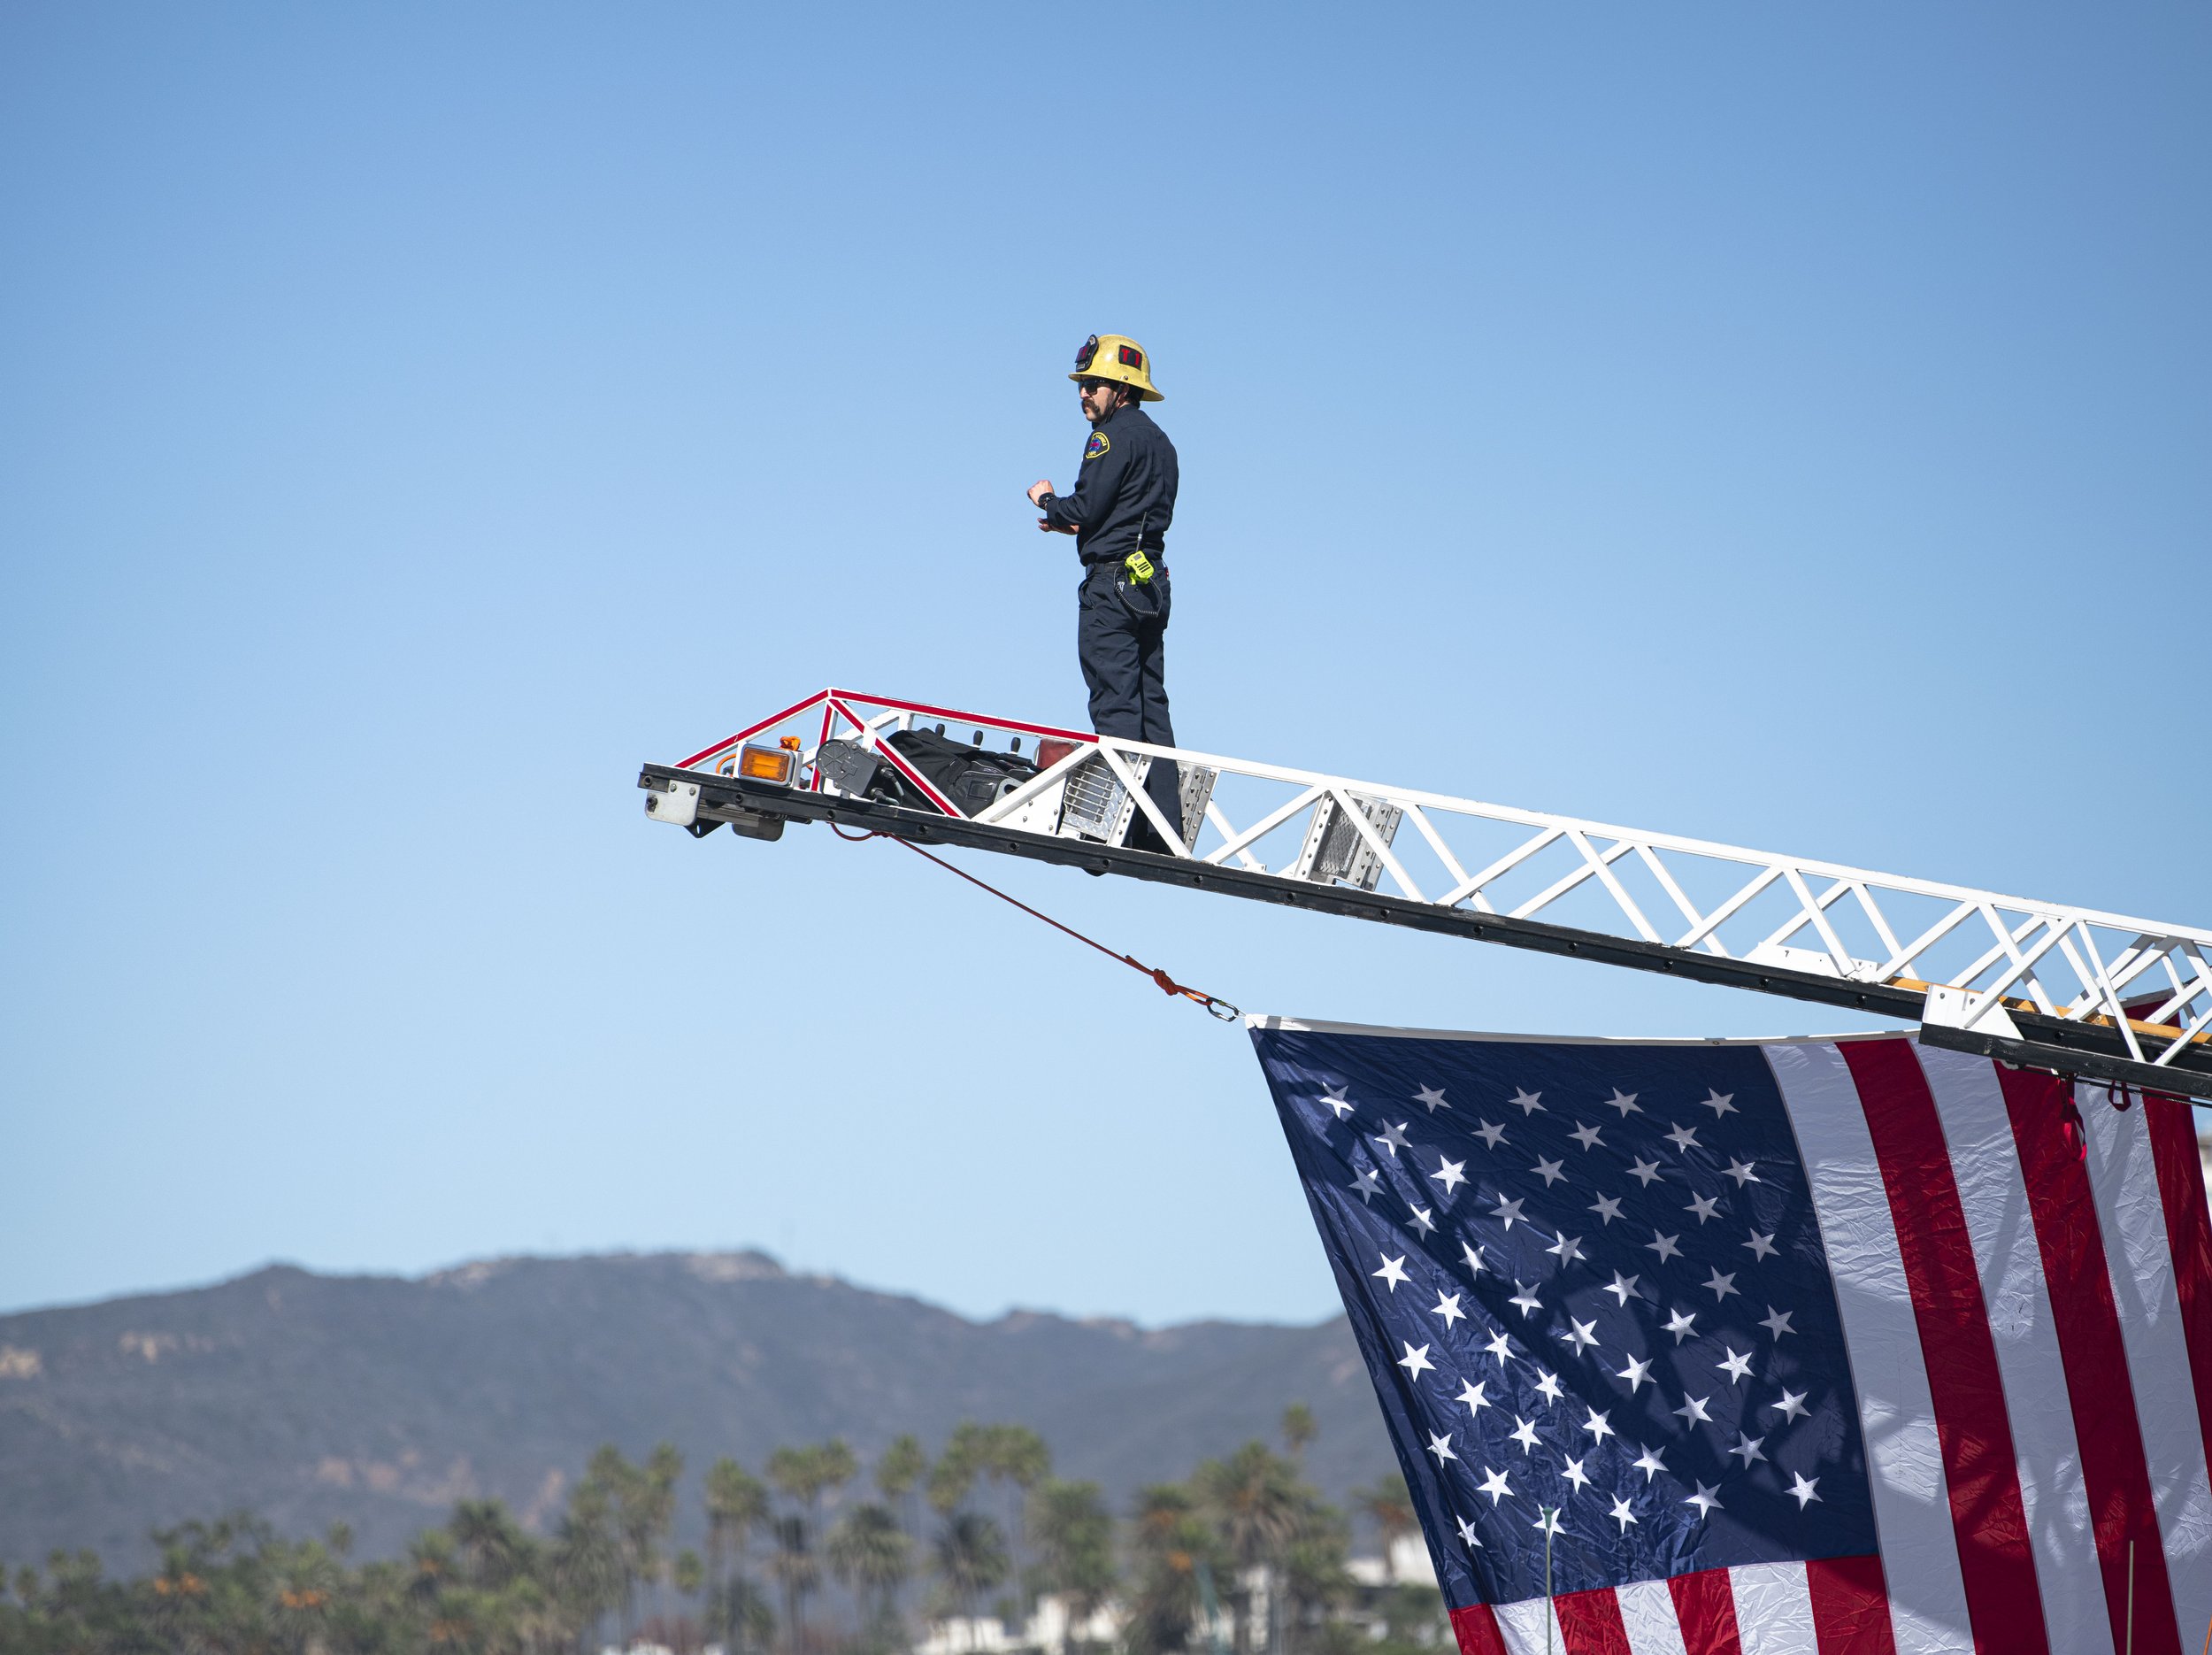  A Santa Monica Firefighter stands atop the fire ladder and looks at the ocean views after securing the enlarged American Flag for the Veterans Day event hosted by both the Los Angeles Army Recruitment Battalion and the California Army National Gaurd